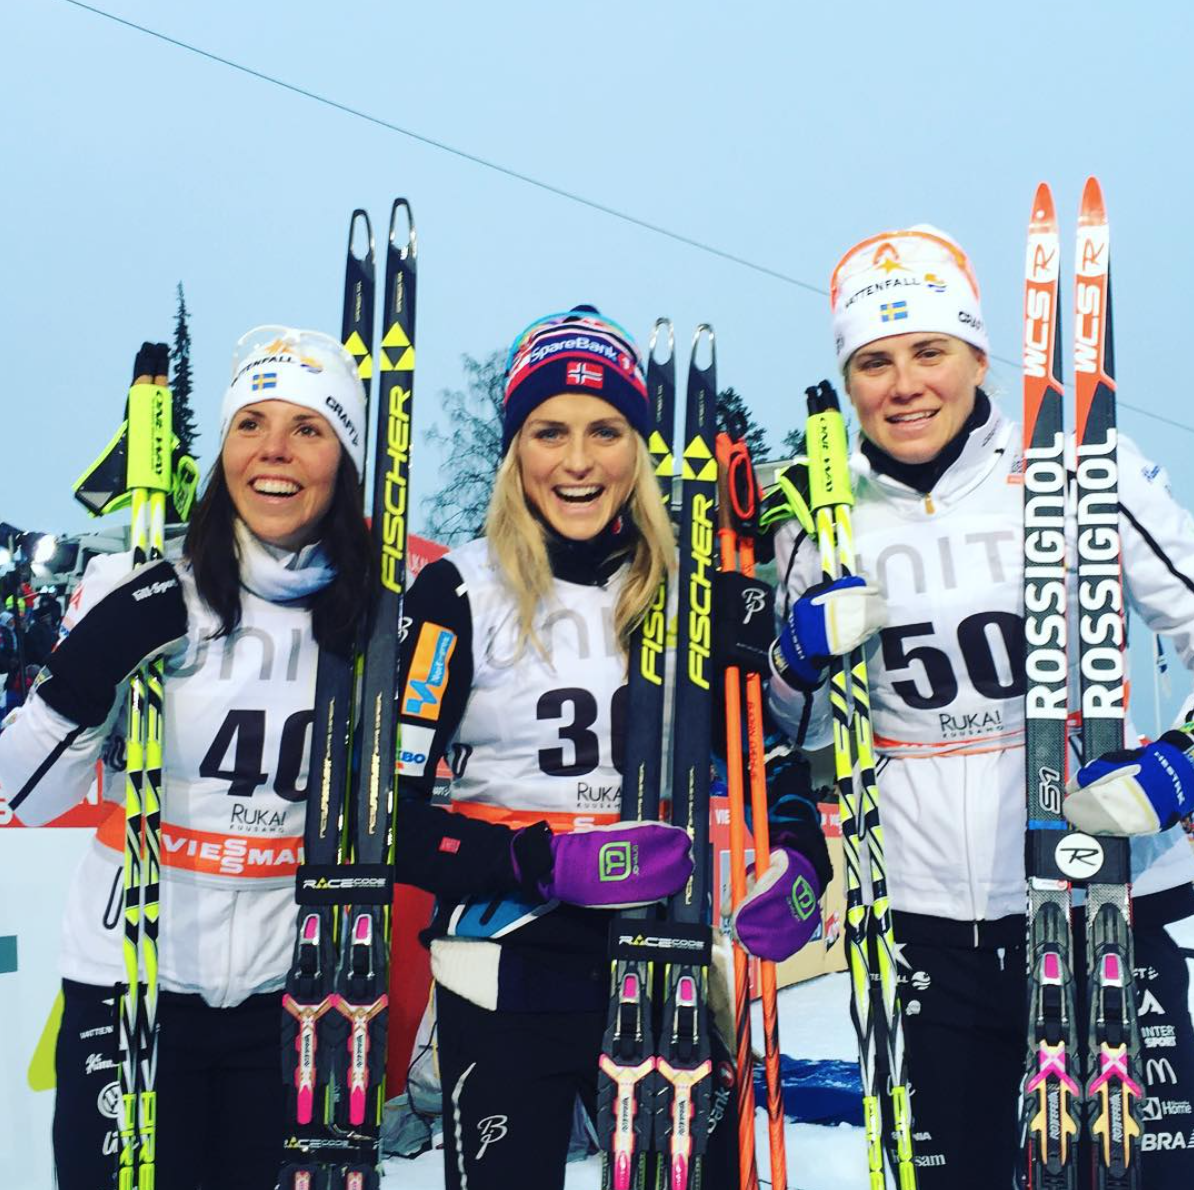 The women's podium in the 5 k classic in Kuusamo, Finland: winner Therese Johaug of Norway (center) and Swedish teammates Charlotte Kalla (left) and Ida Ingemarsdotter in second and third, respectively. (Photo: FIS Cross Country / Instagram)